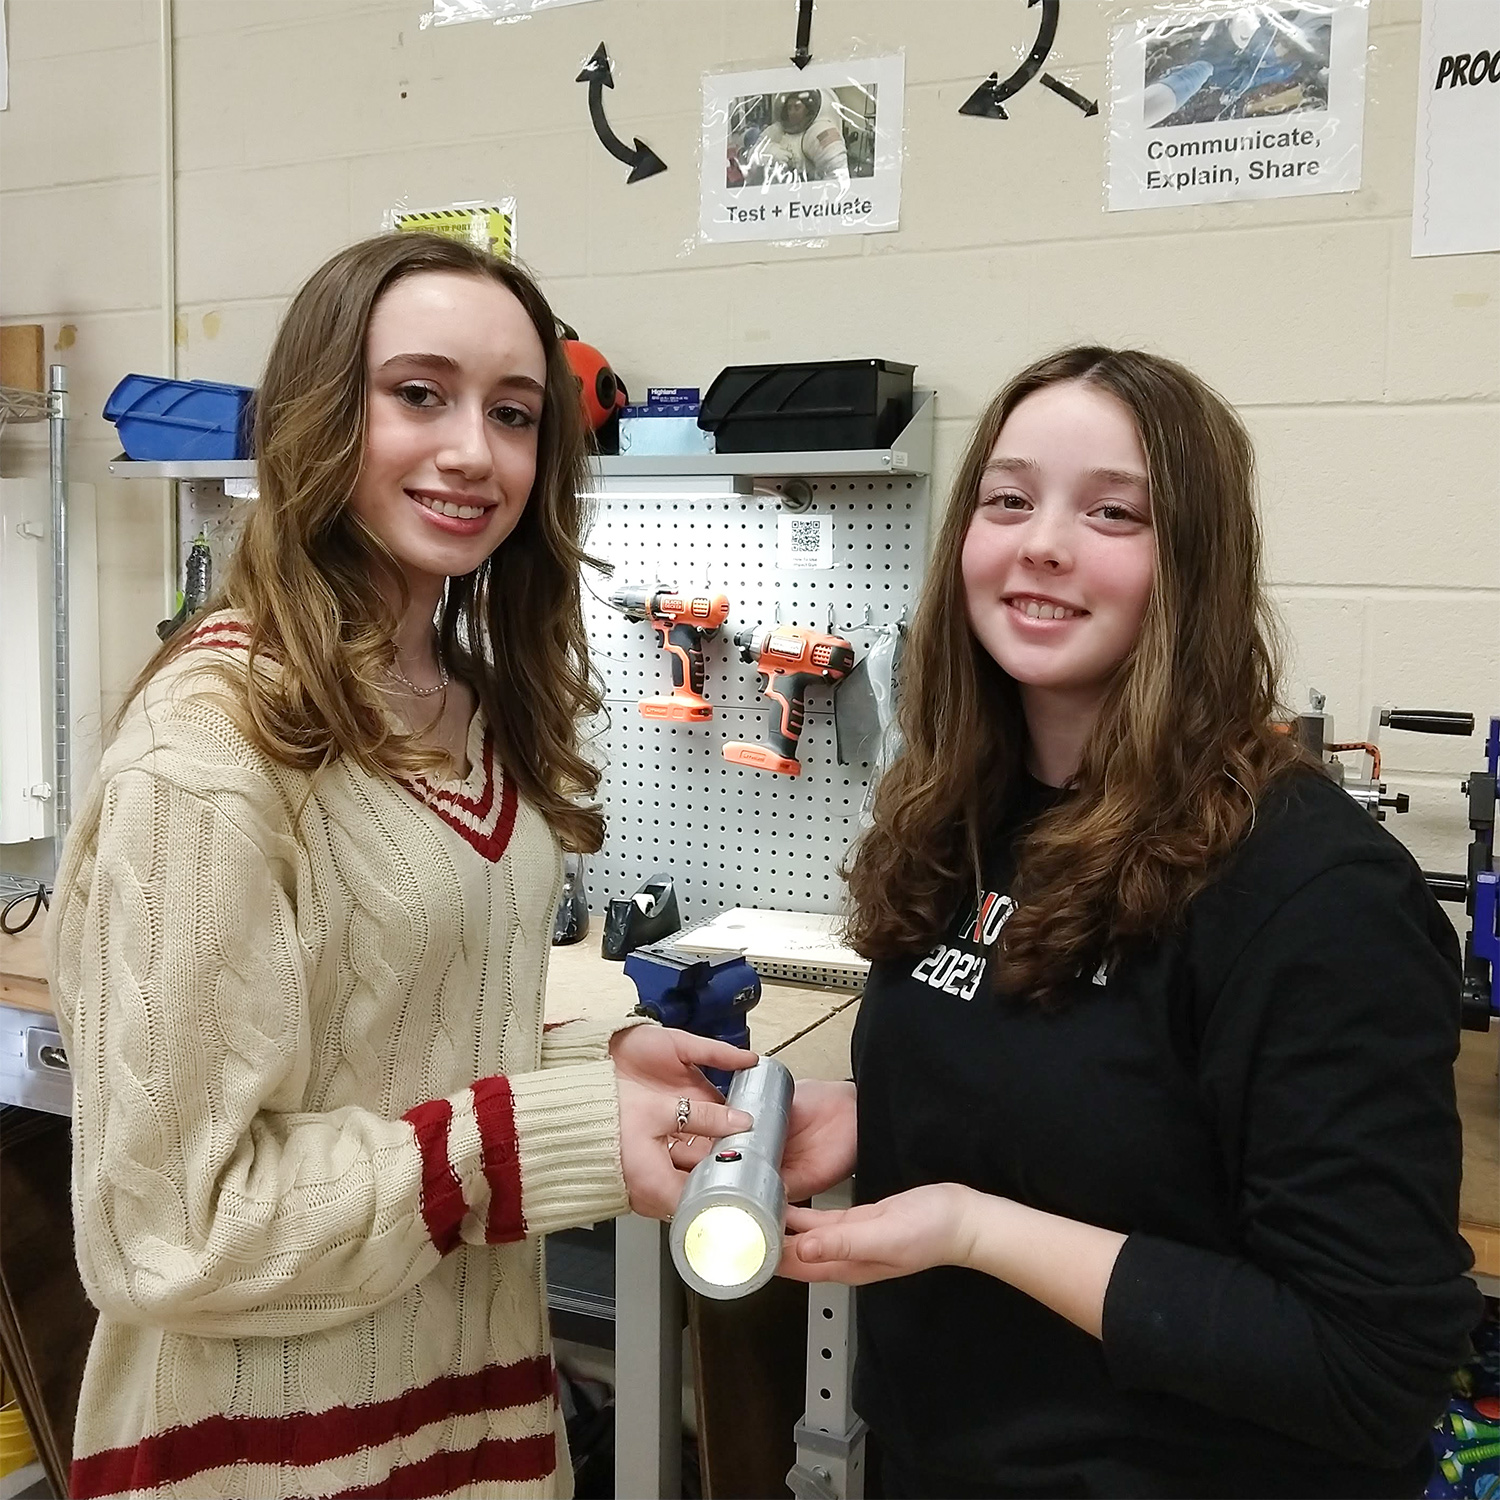 Lauren Strechay and Nicolette Buonora with their invention, the Battery Swap flashlight.